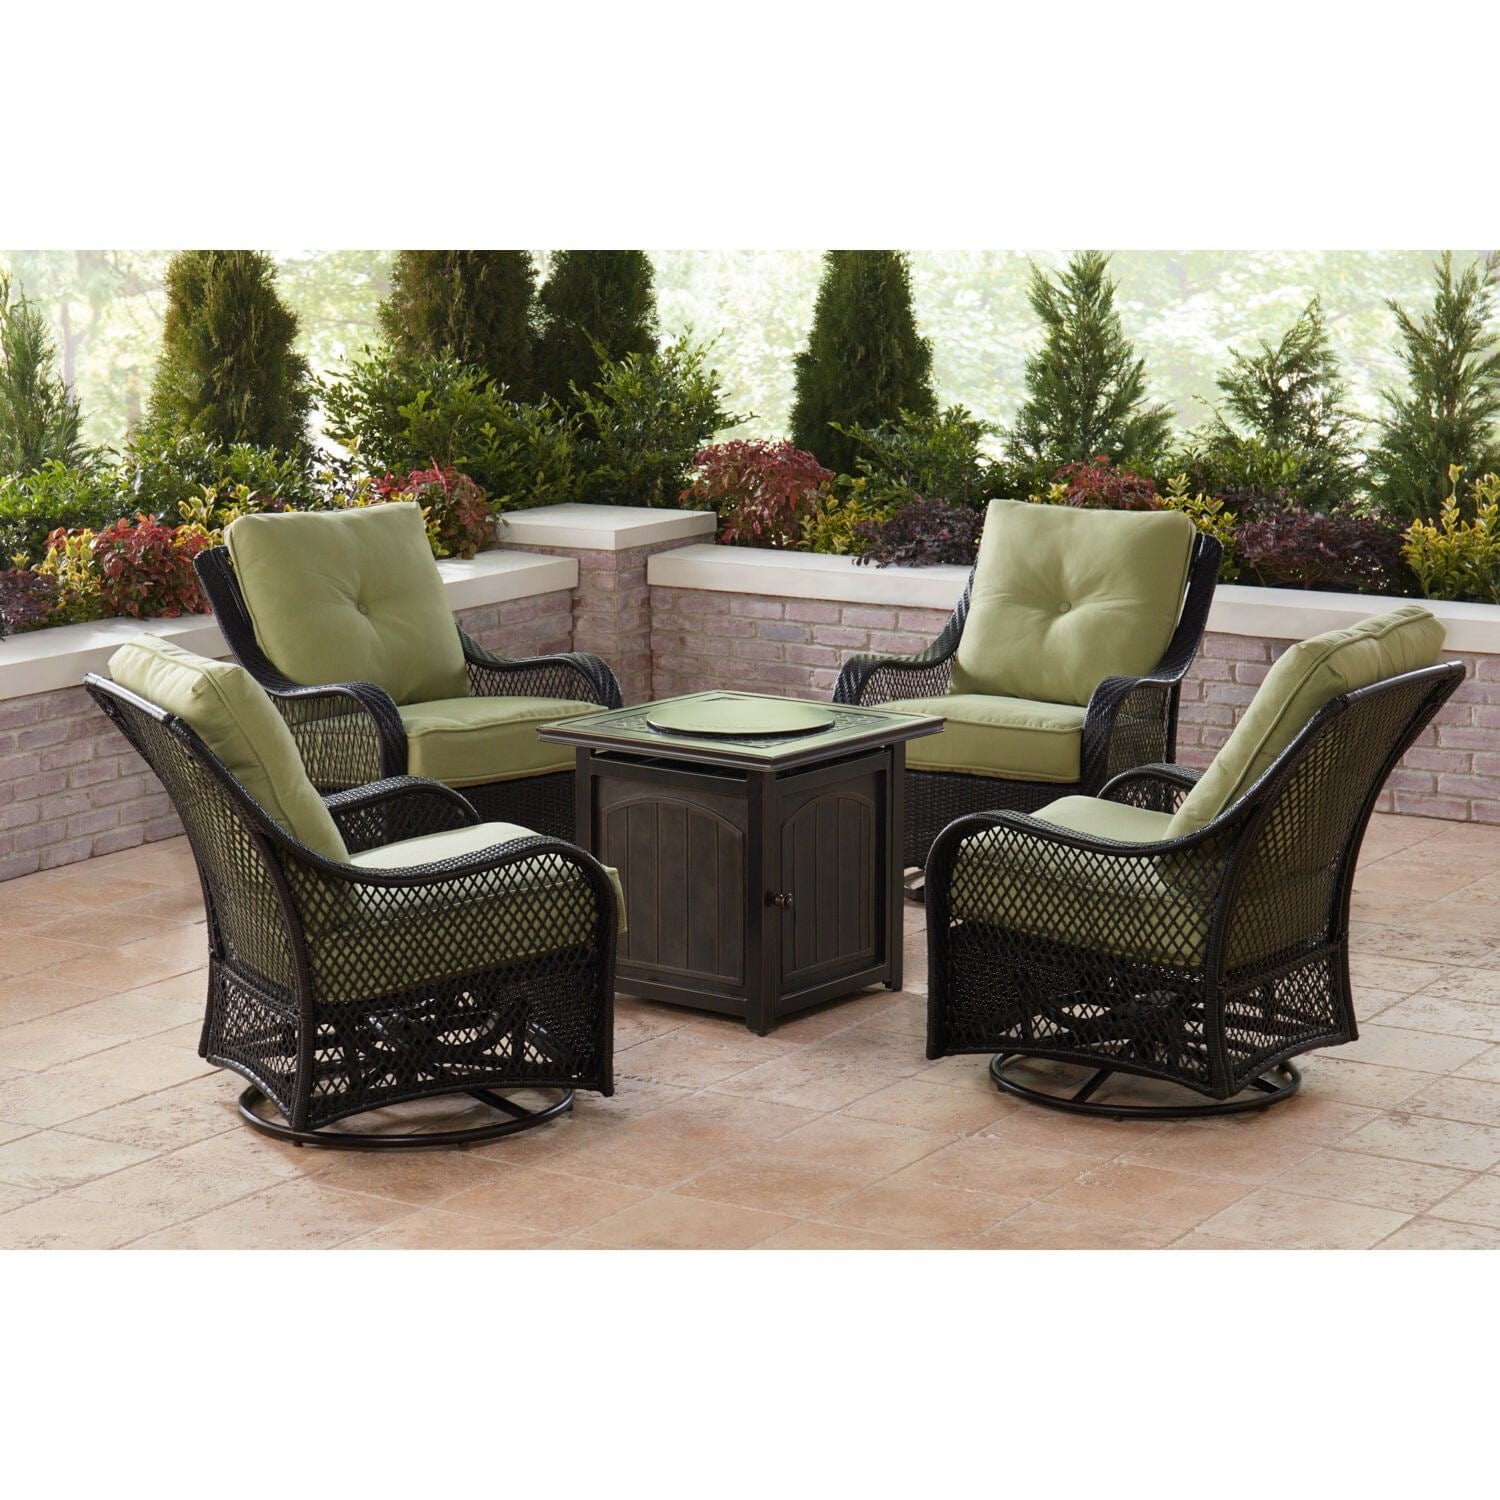 Hanover Fire Table Dining Set Hanover - Orleans 5-Piece Fire Pit Chat Set in Avocado Green with 4 Woven Swivel Gliders and a 26-In. Square Fire Pit Table | 31x34 | ORL5PCFPSQ-GRN